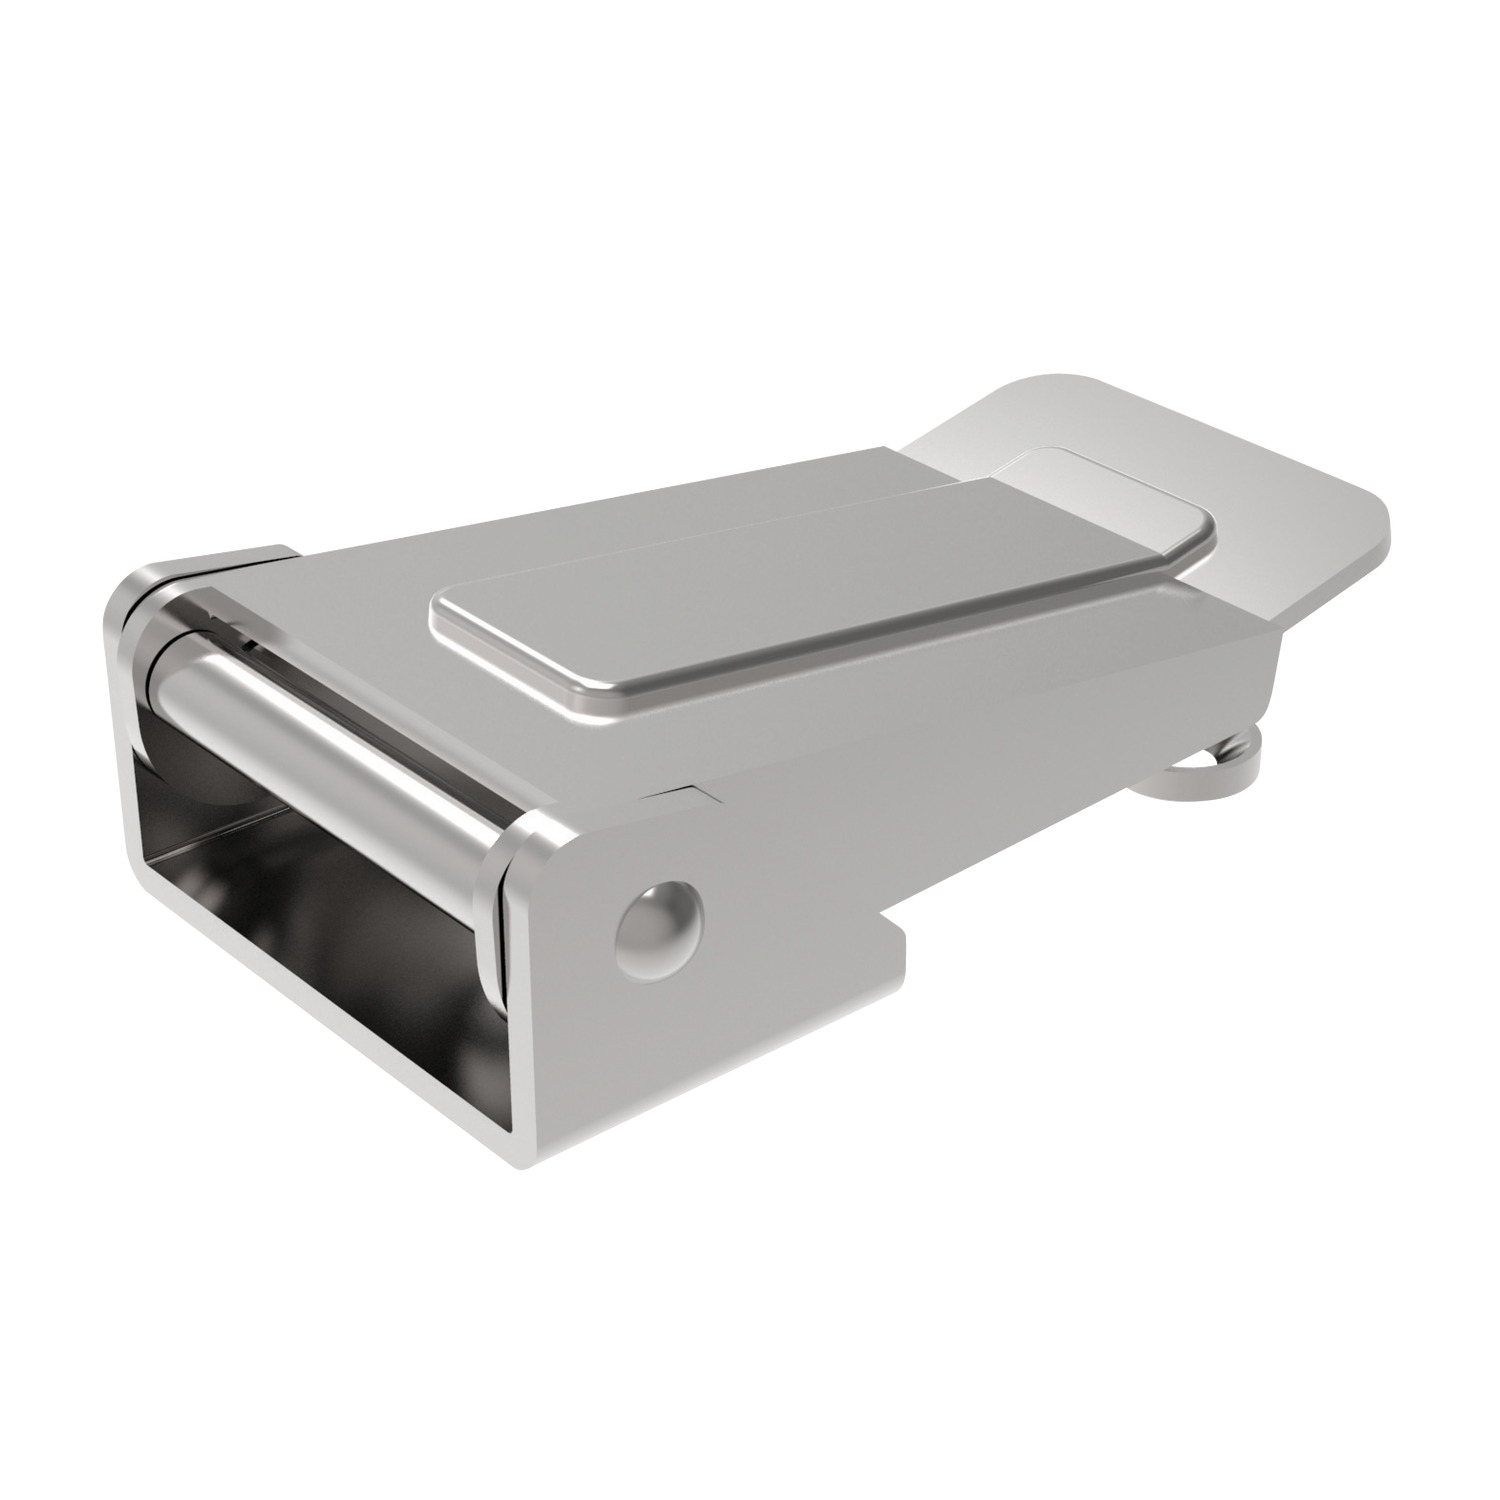 Toggle Latches Rear strike mounting draw latch, with upto 12 mm adjustment. Robust design, with total foot print of 88mm.